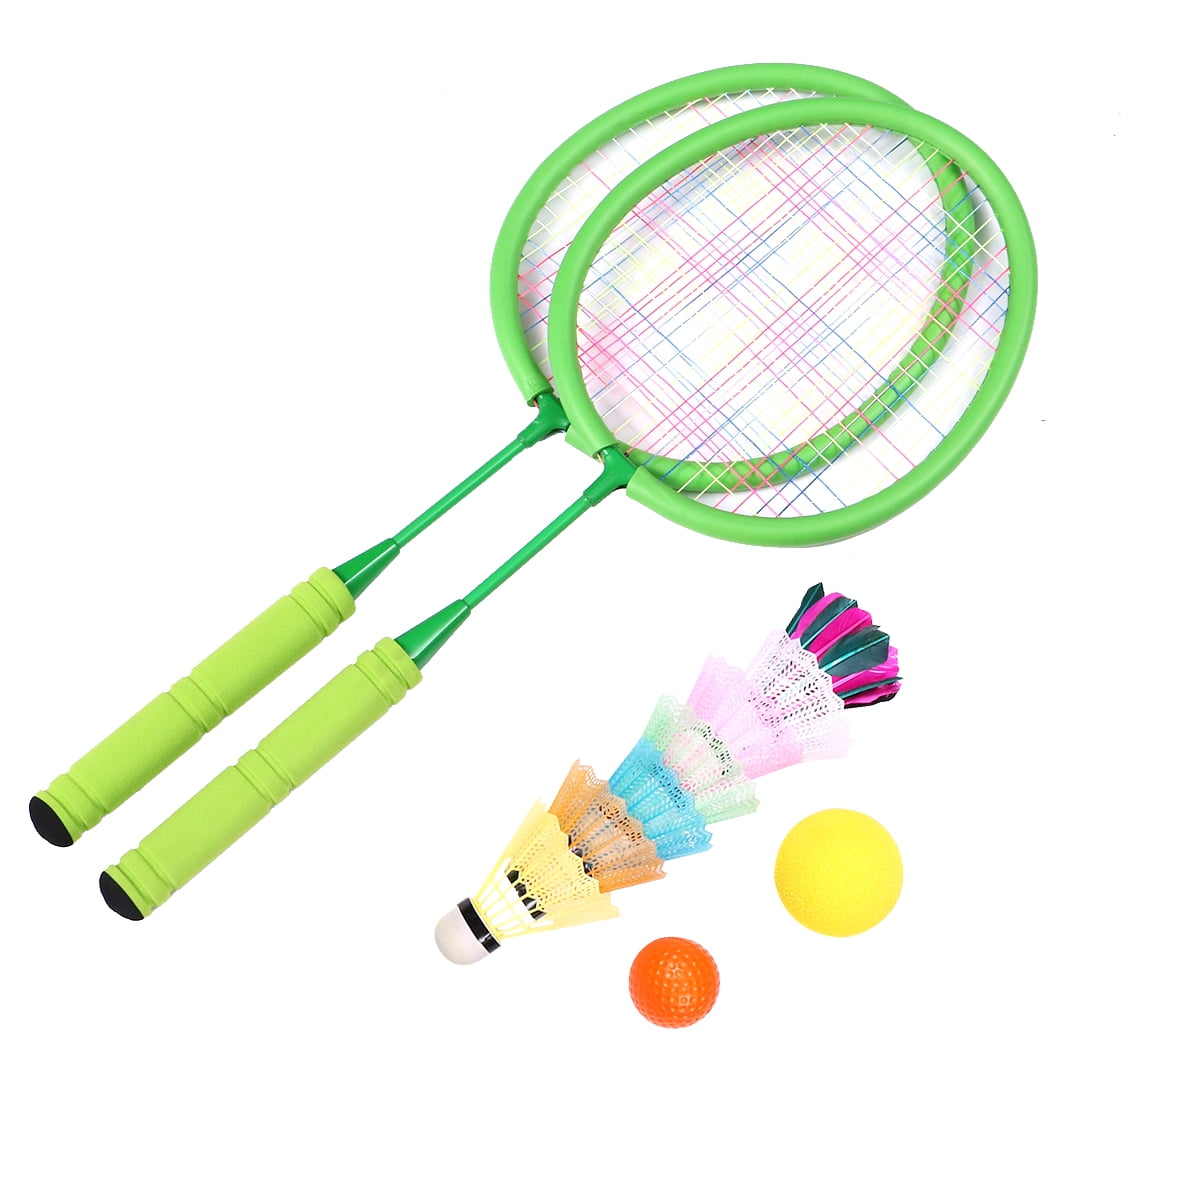 1 set Badminton Racket Badminton Training Tool Outdoor Sports Playing Toy  set with Bag for Children with 15pcs Badmintons Random Color | Walmart  Canada